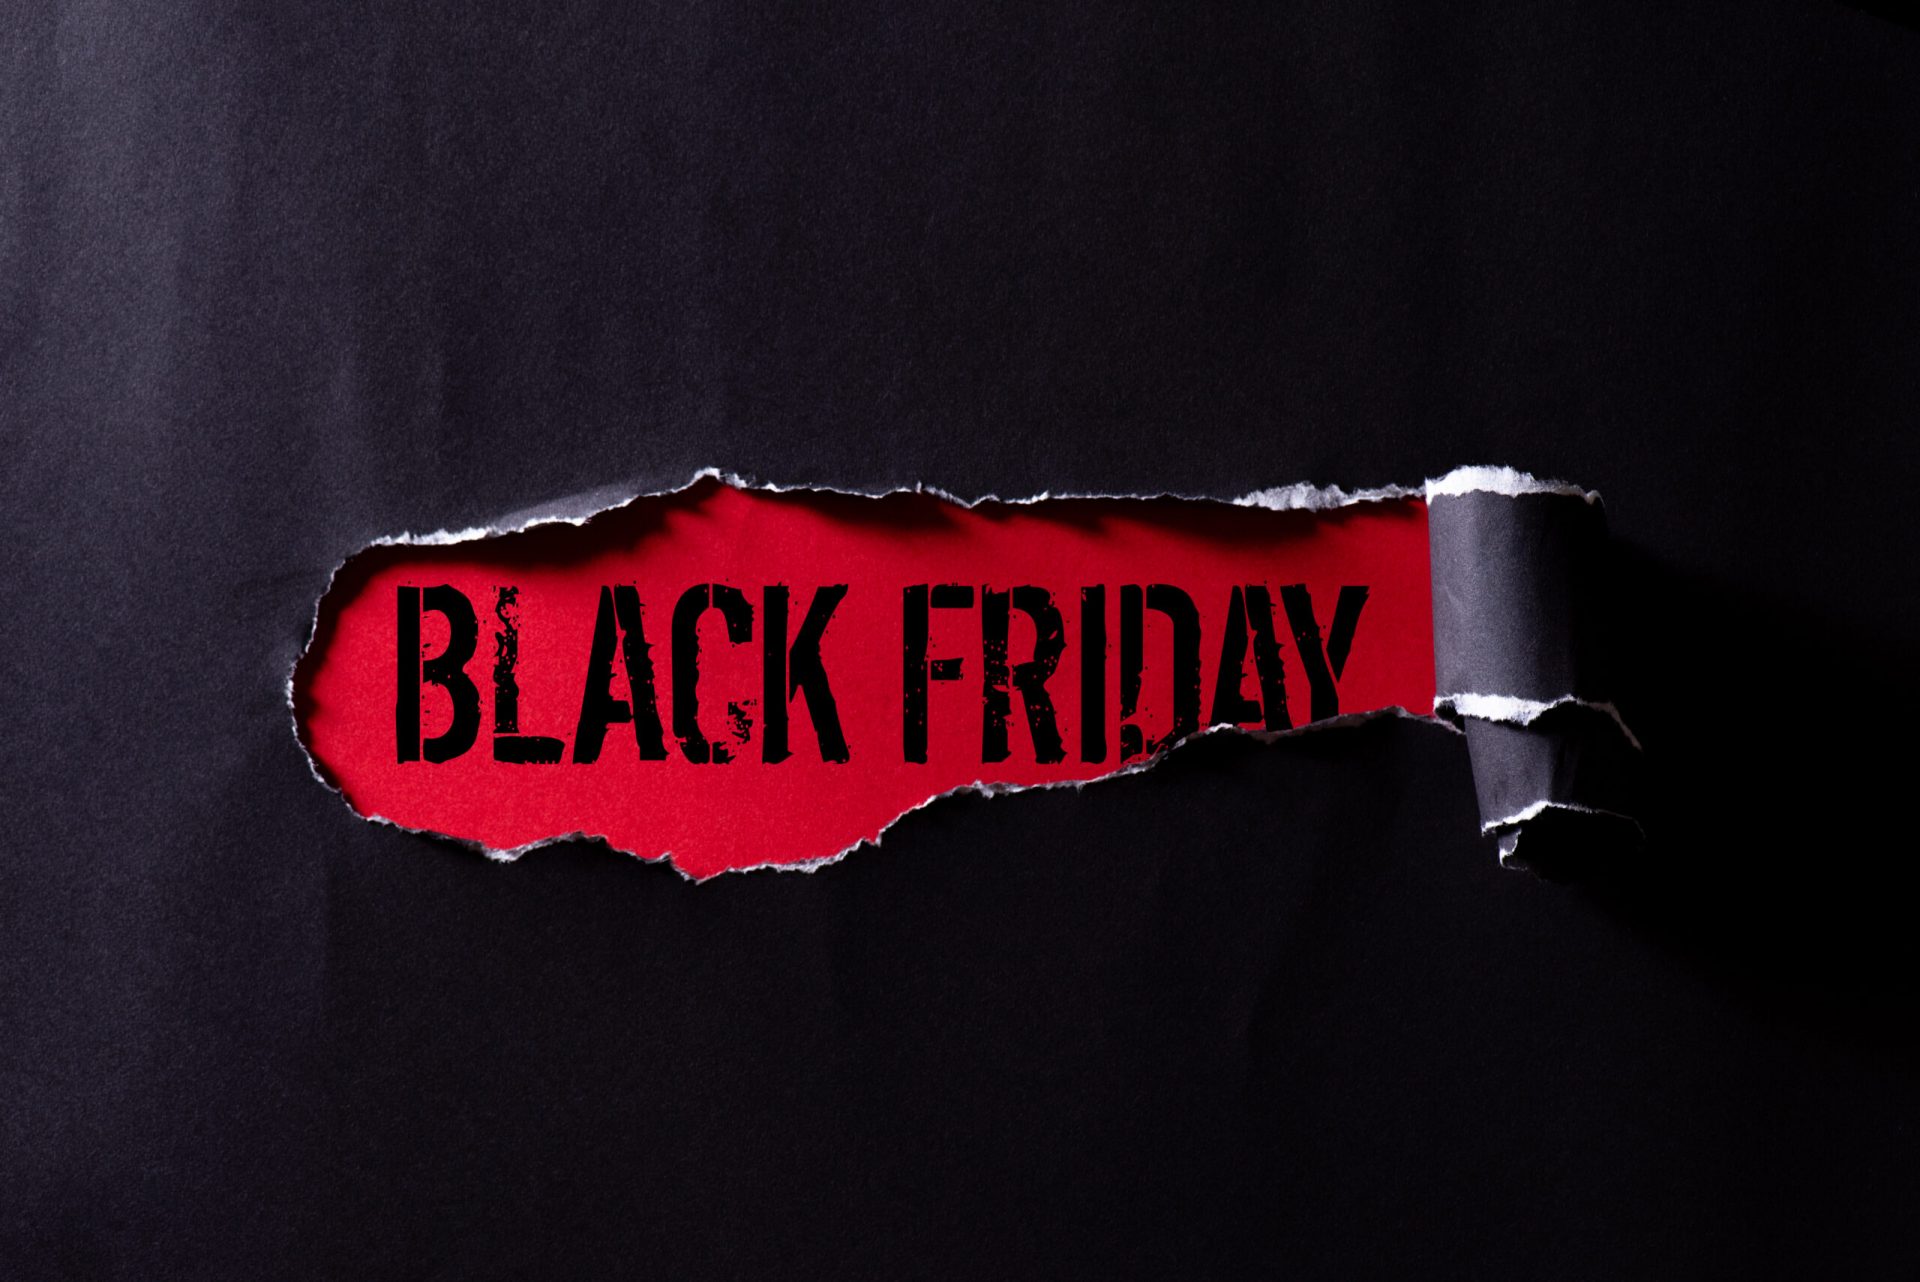 How to Prepare Your Dropshipping Store for Black Friday